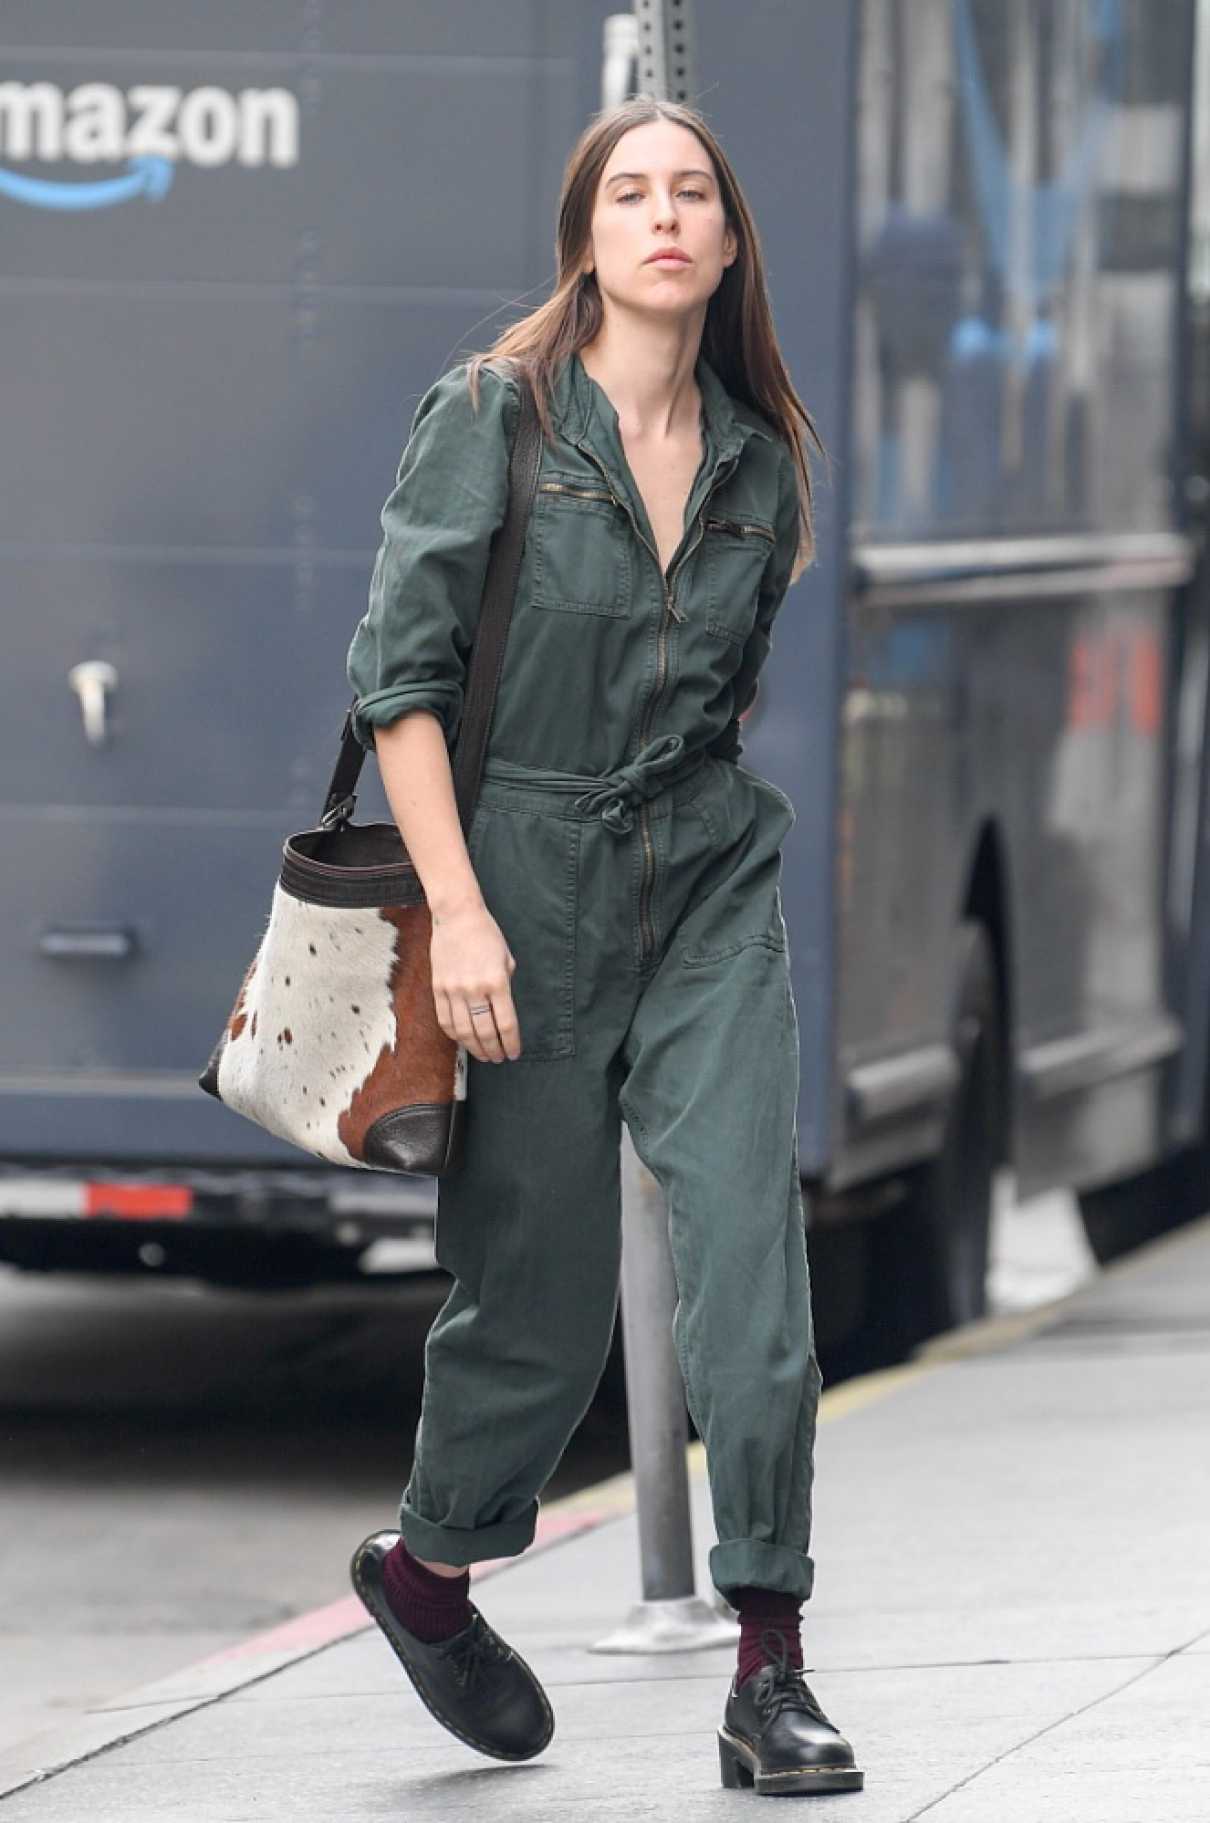 Scout Willis in an Olive Jumpsuit